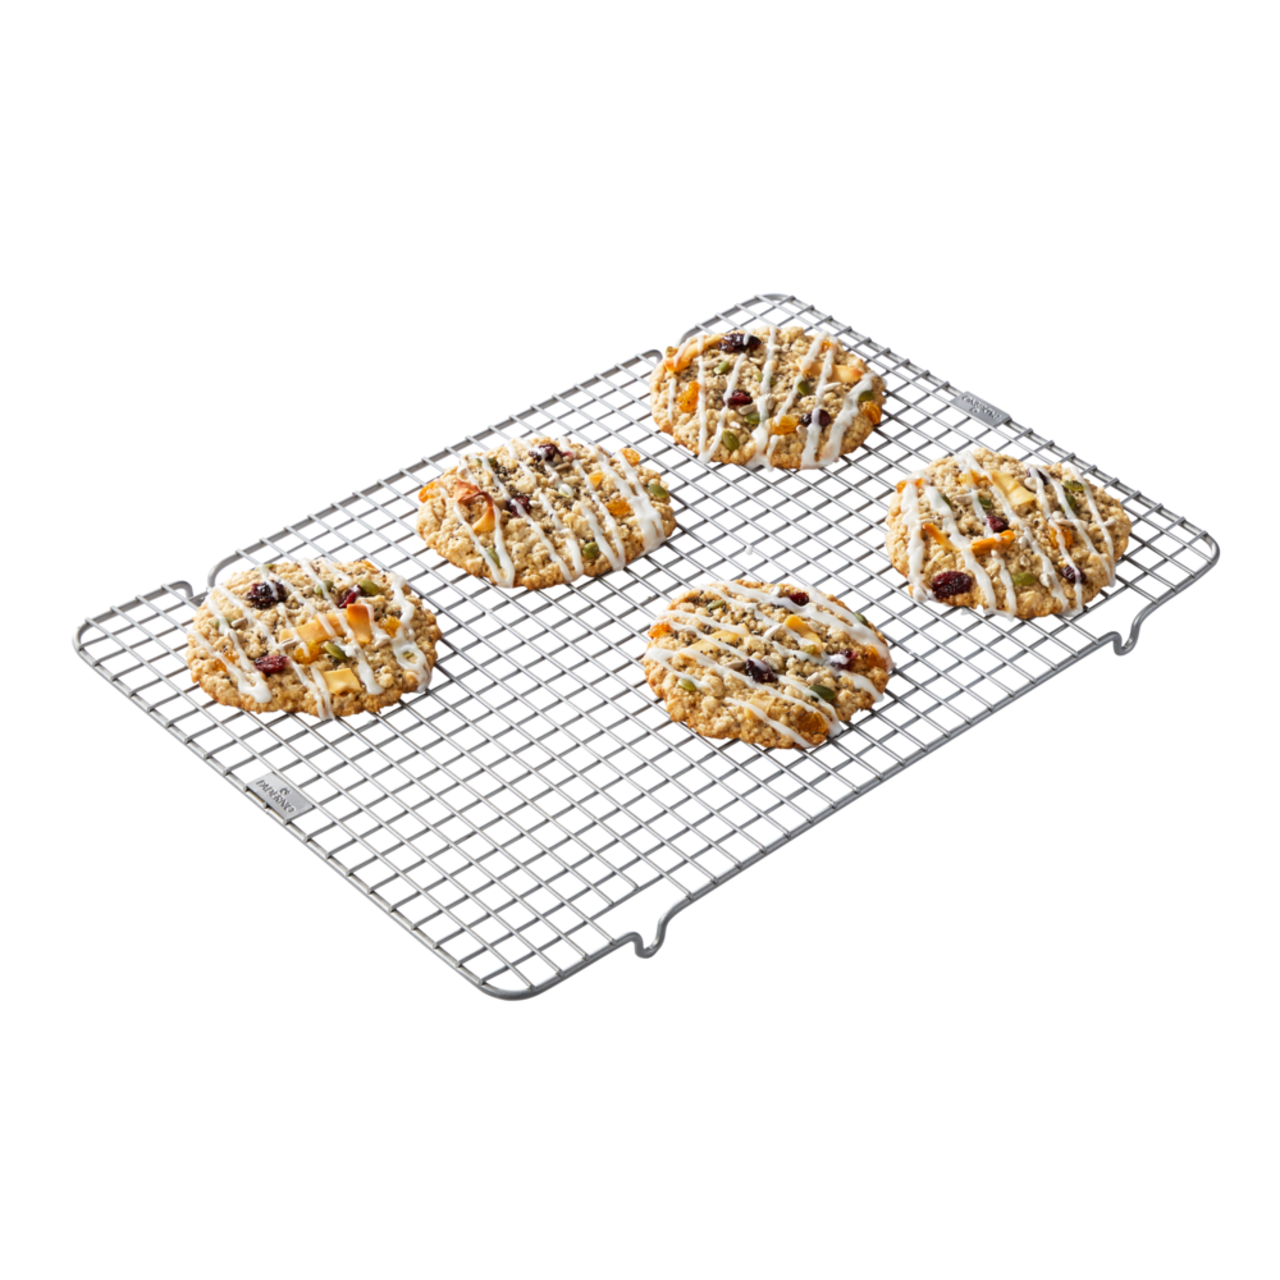 https://media-www.canadiantire.ca/product/living/kitchen/kitchen-tools-thermometers/1429581/paderno-cooling-rack-c90bfadd-2670-492c-aa26-475db153c809.png?imdensity=1&imwidth=1244&impolicy=mZoom